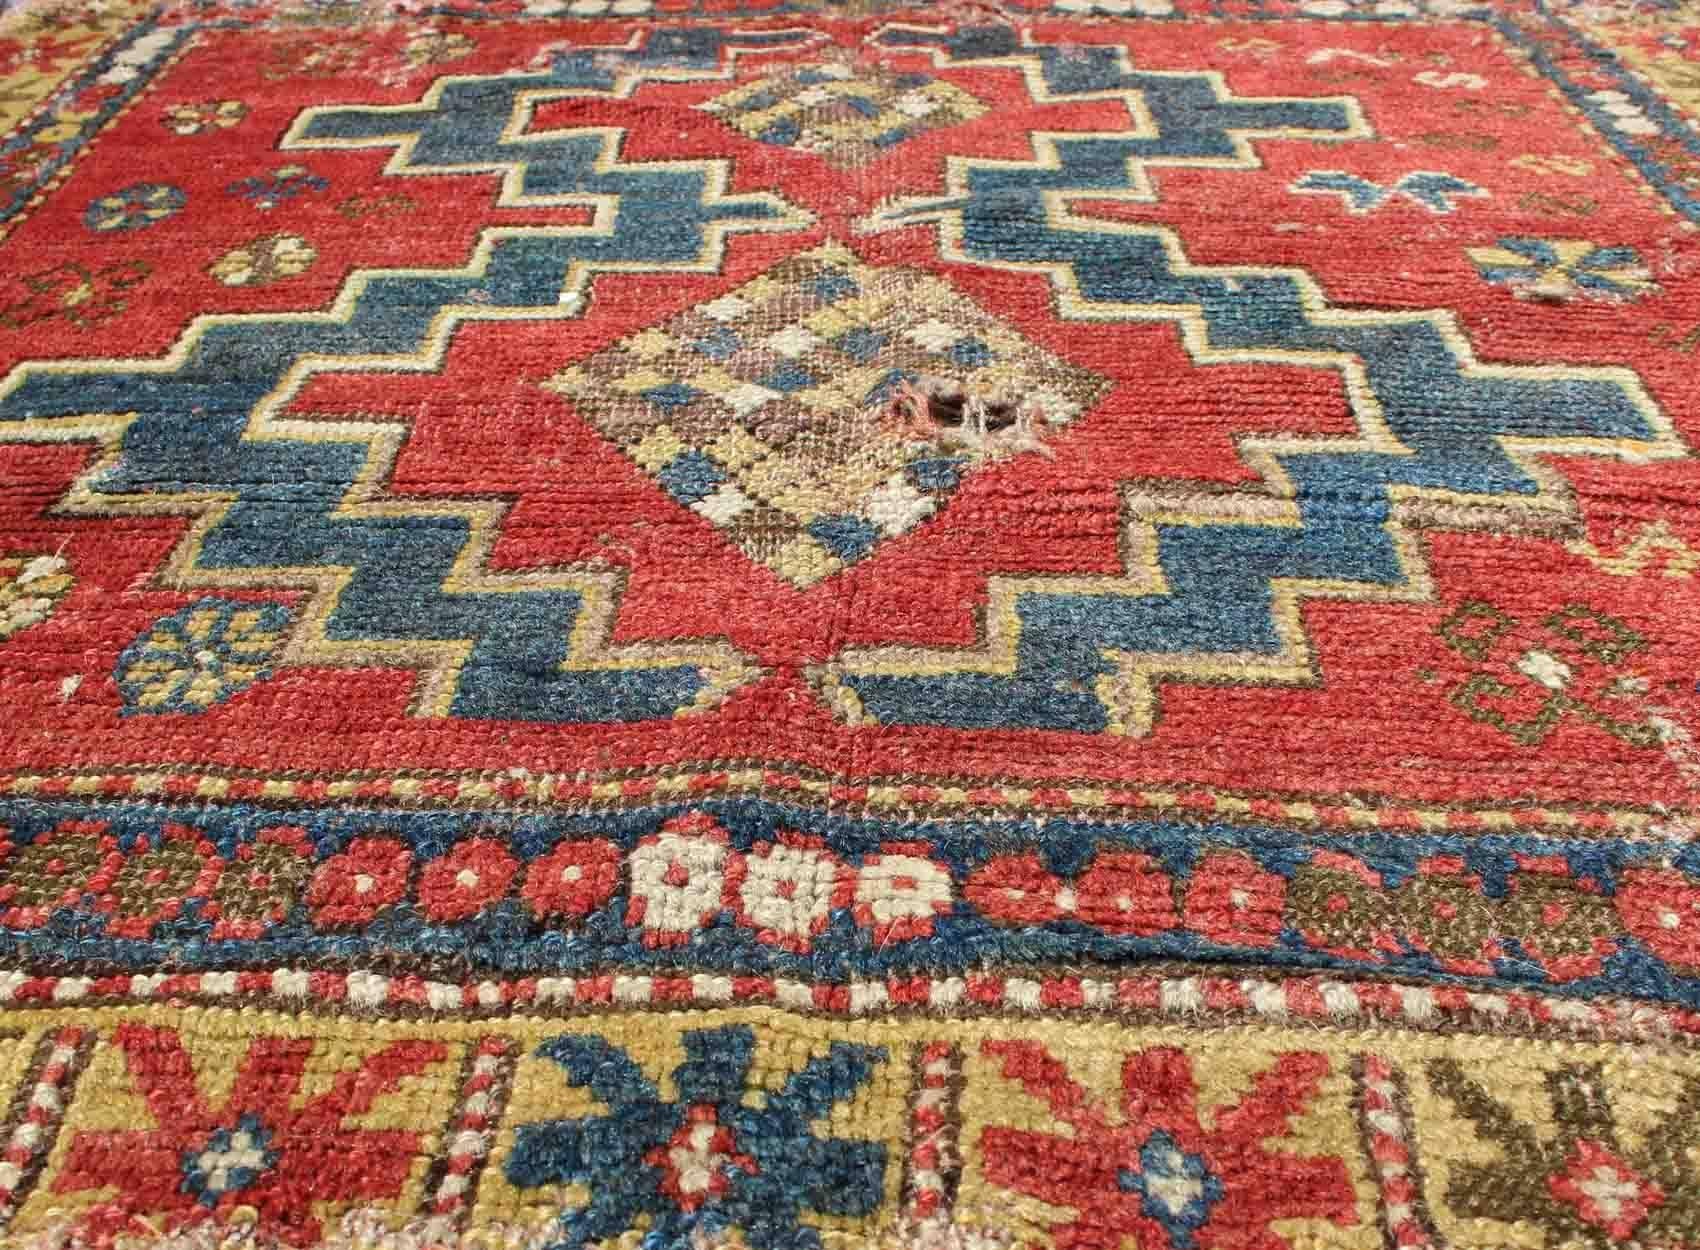 Kazak Square-Shaped Antique Caucasian Rug with Dual Medallions and Tribal Motifs